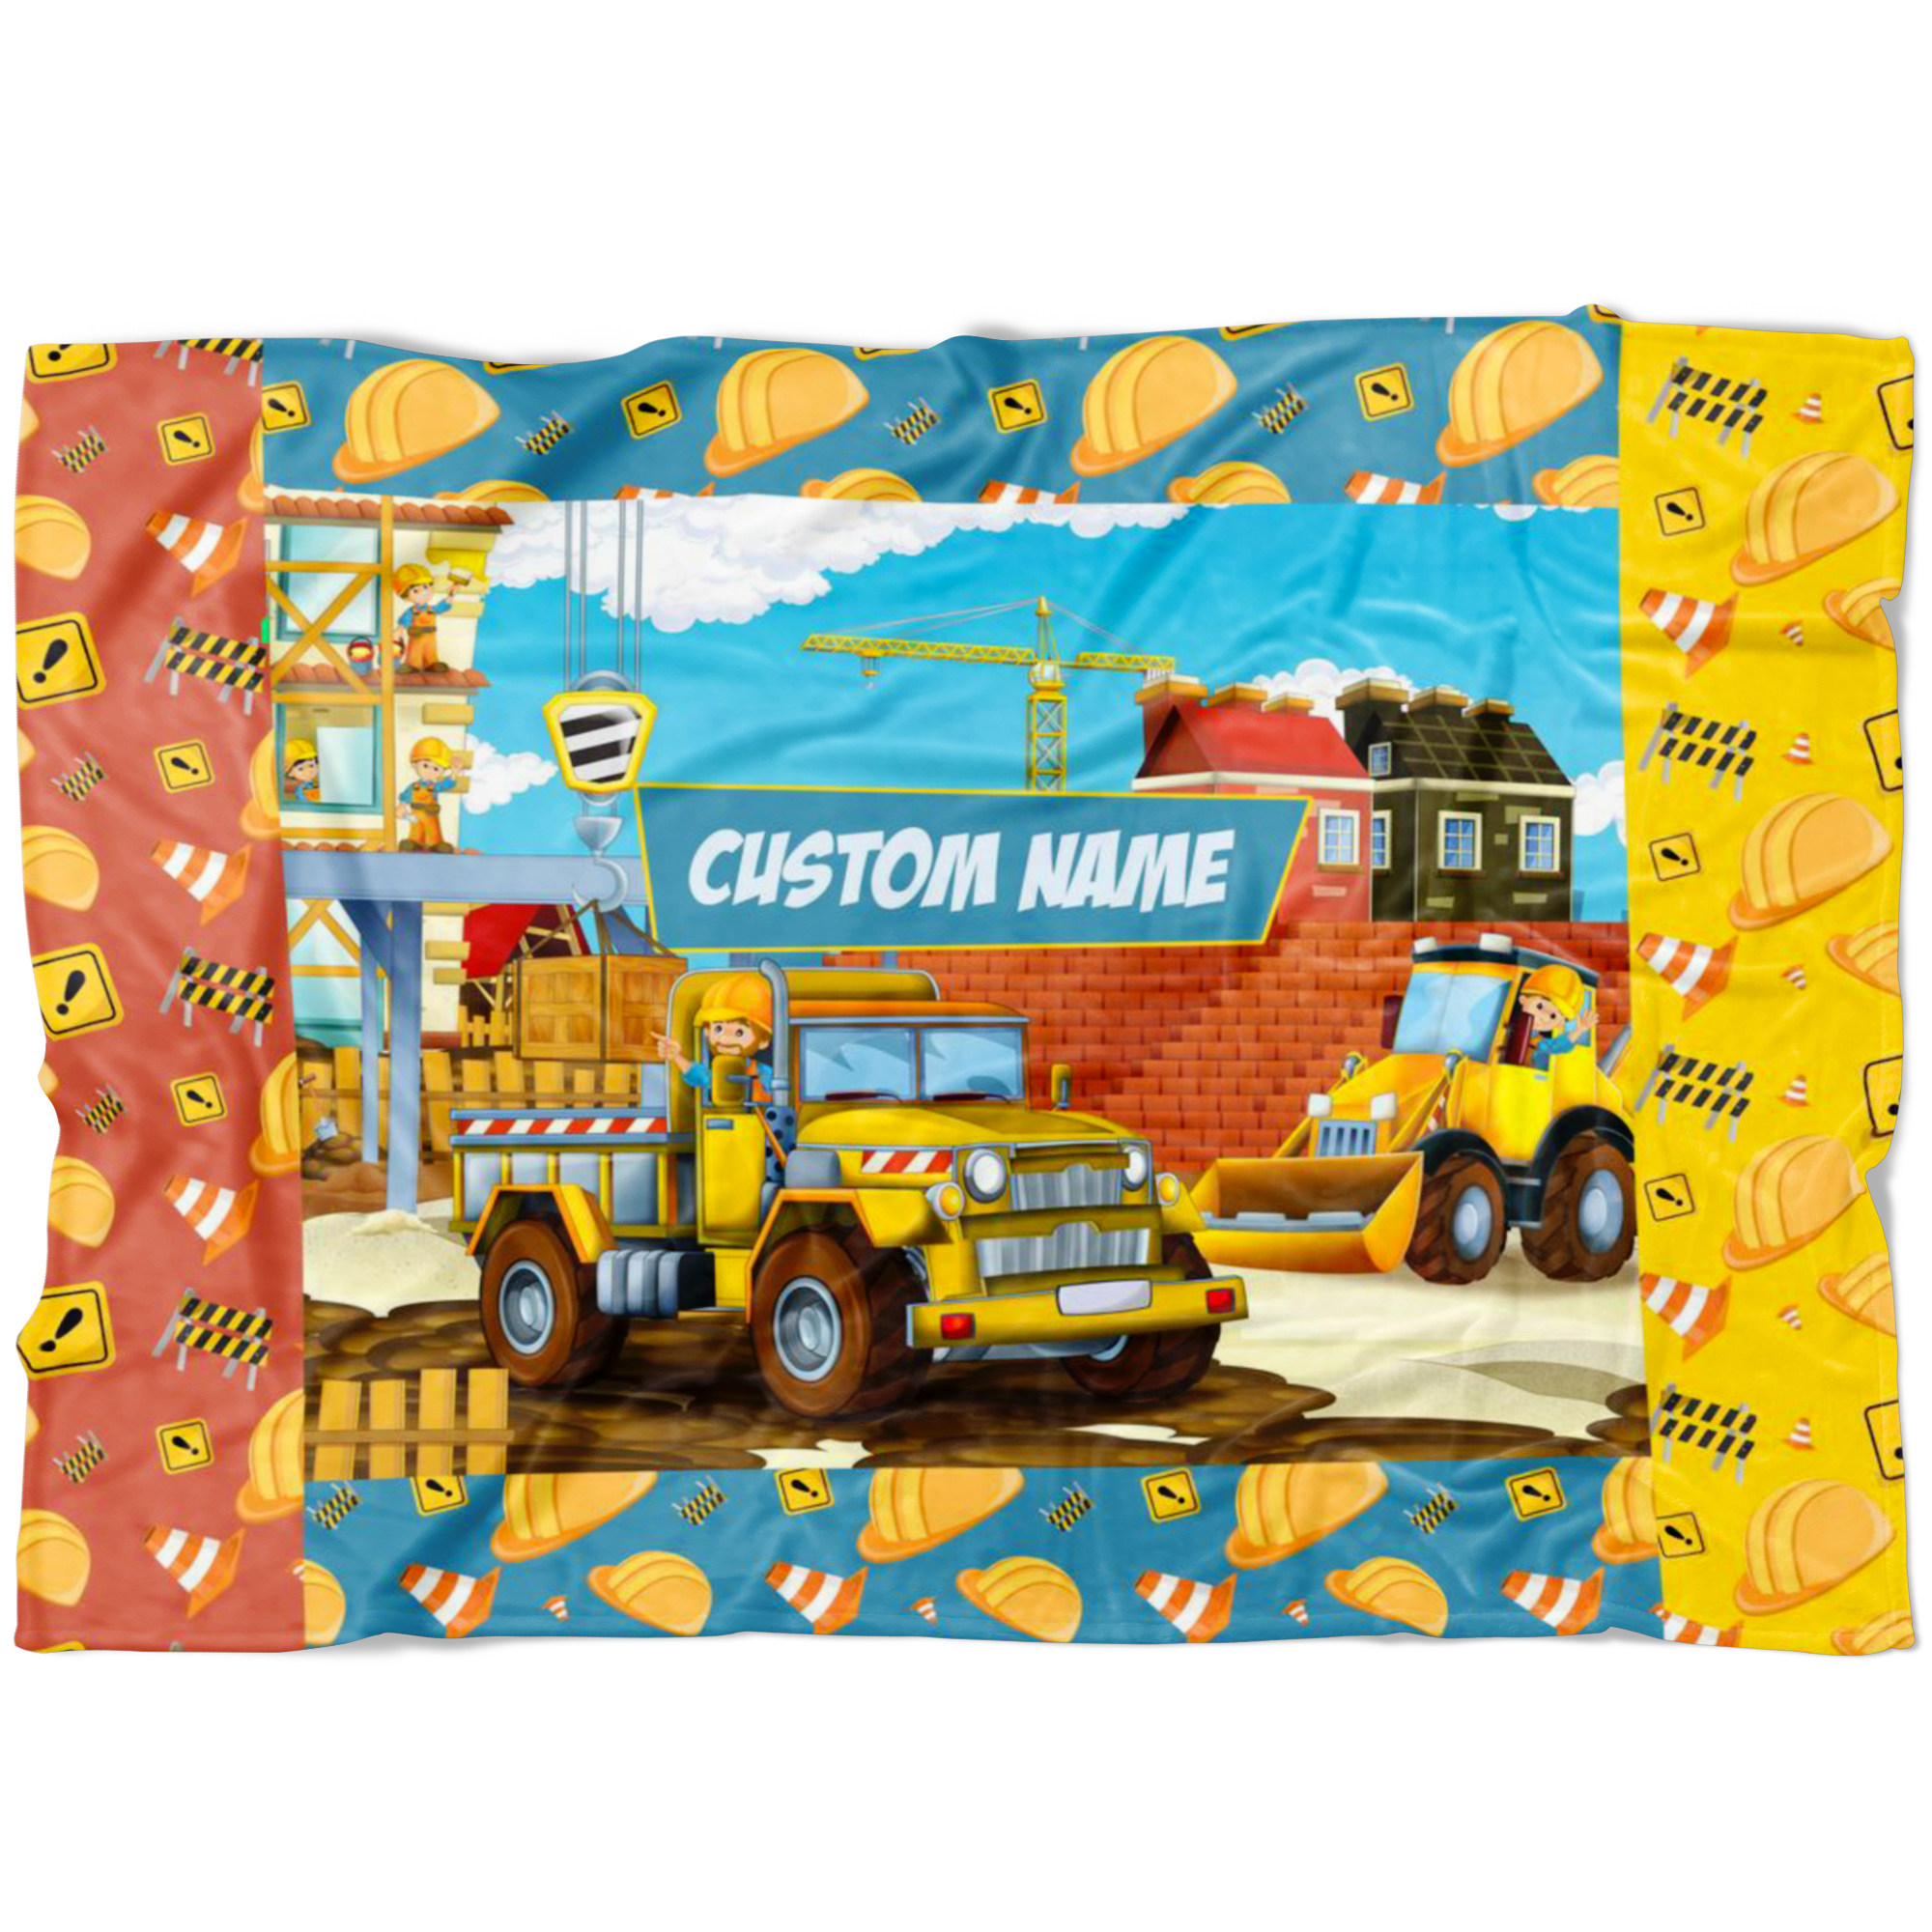 Personalized Name Construction Site Machinery Blanket for Boys & Girls